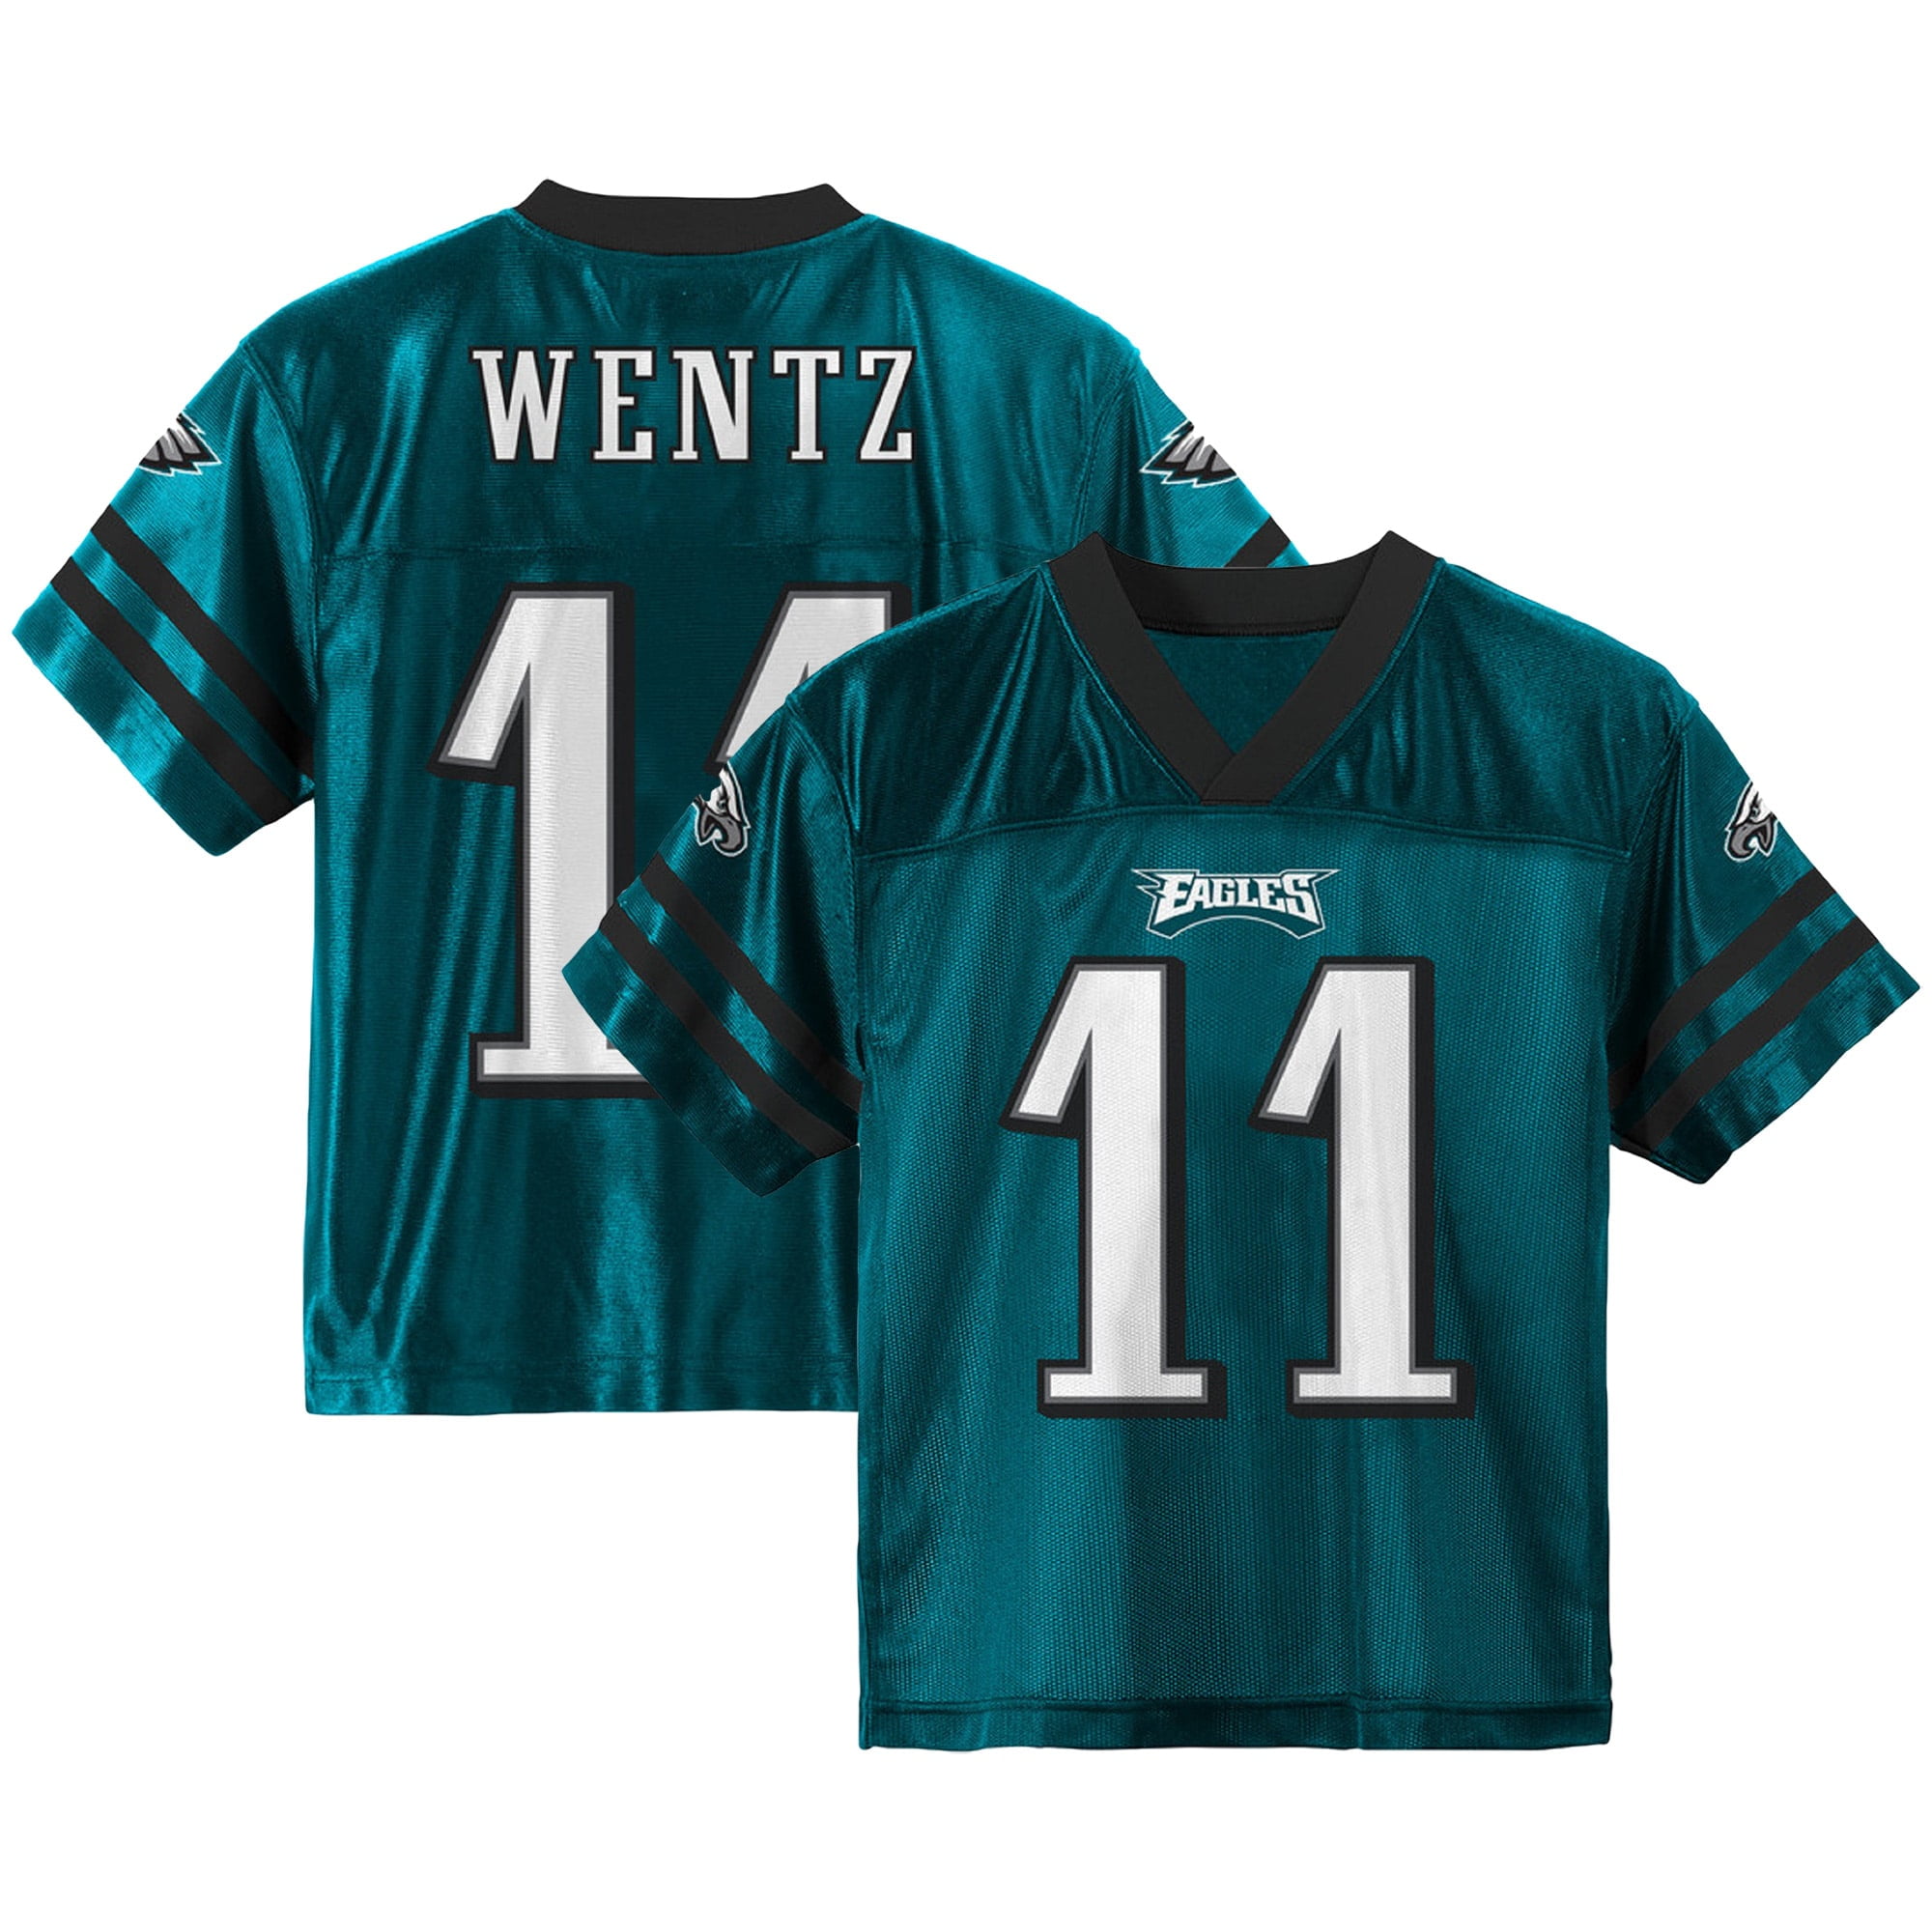 4t eagles jersey